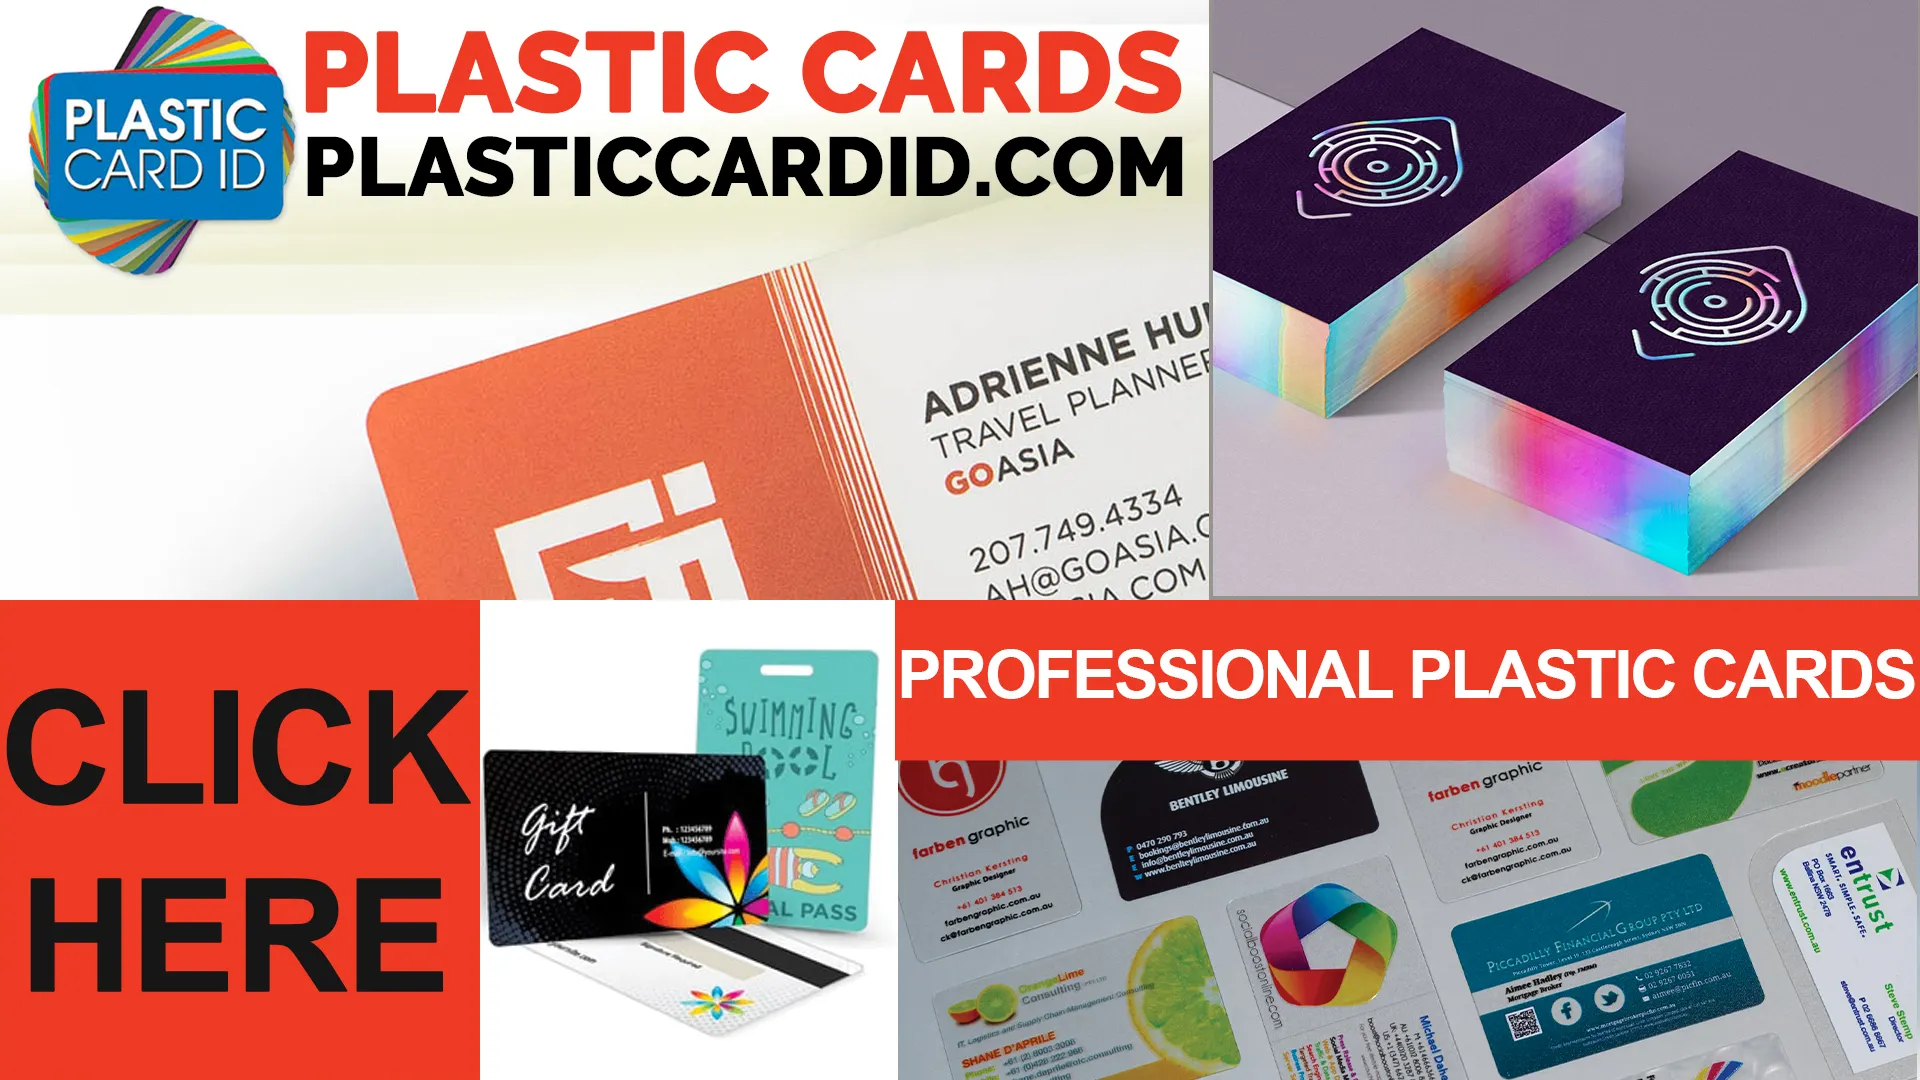 Welcome to Plastic Card ID




: Your Partner in Global Card Distribution